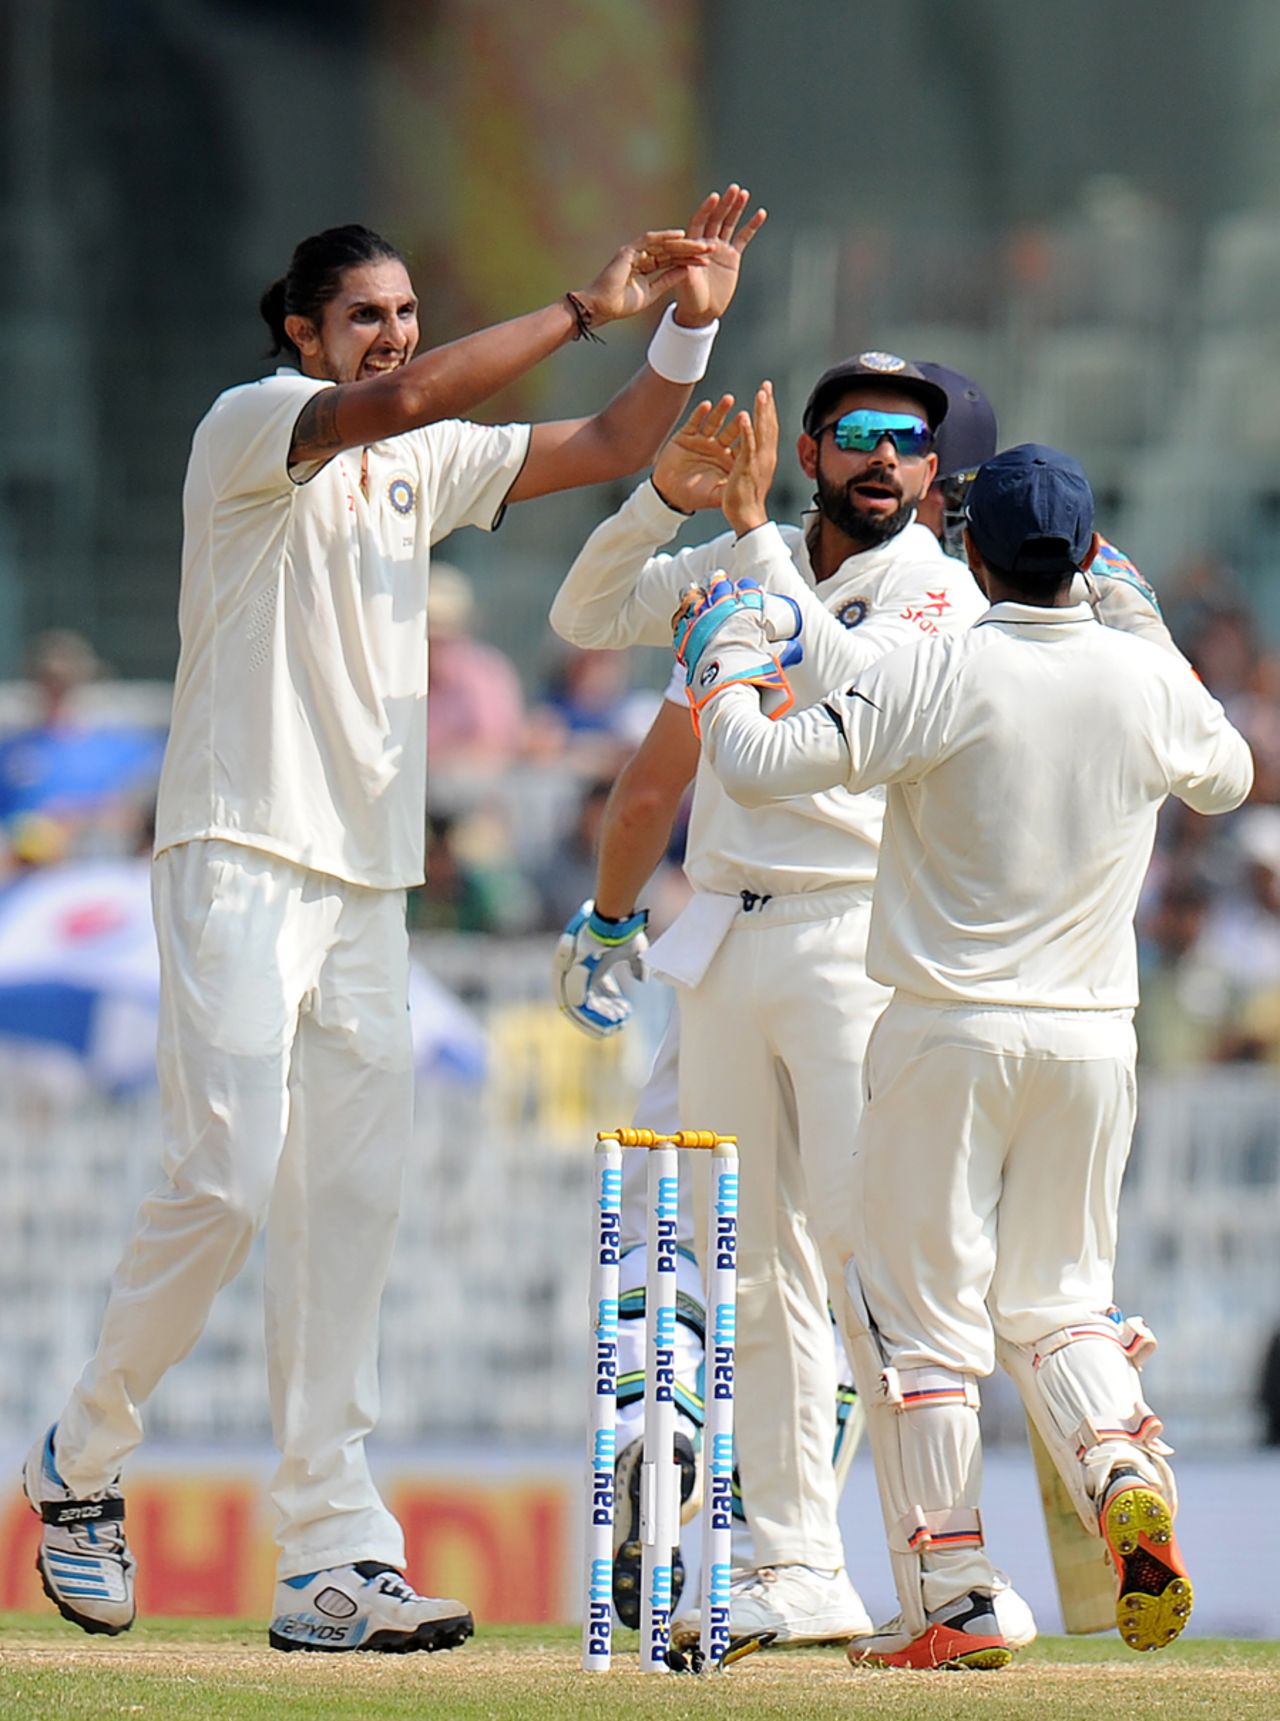 Ishant Sharma celebrates with his team-mates after dismissing Jos Buttler, India v England, 5th Test, Chennai, 2nd day, December 17, 2016